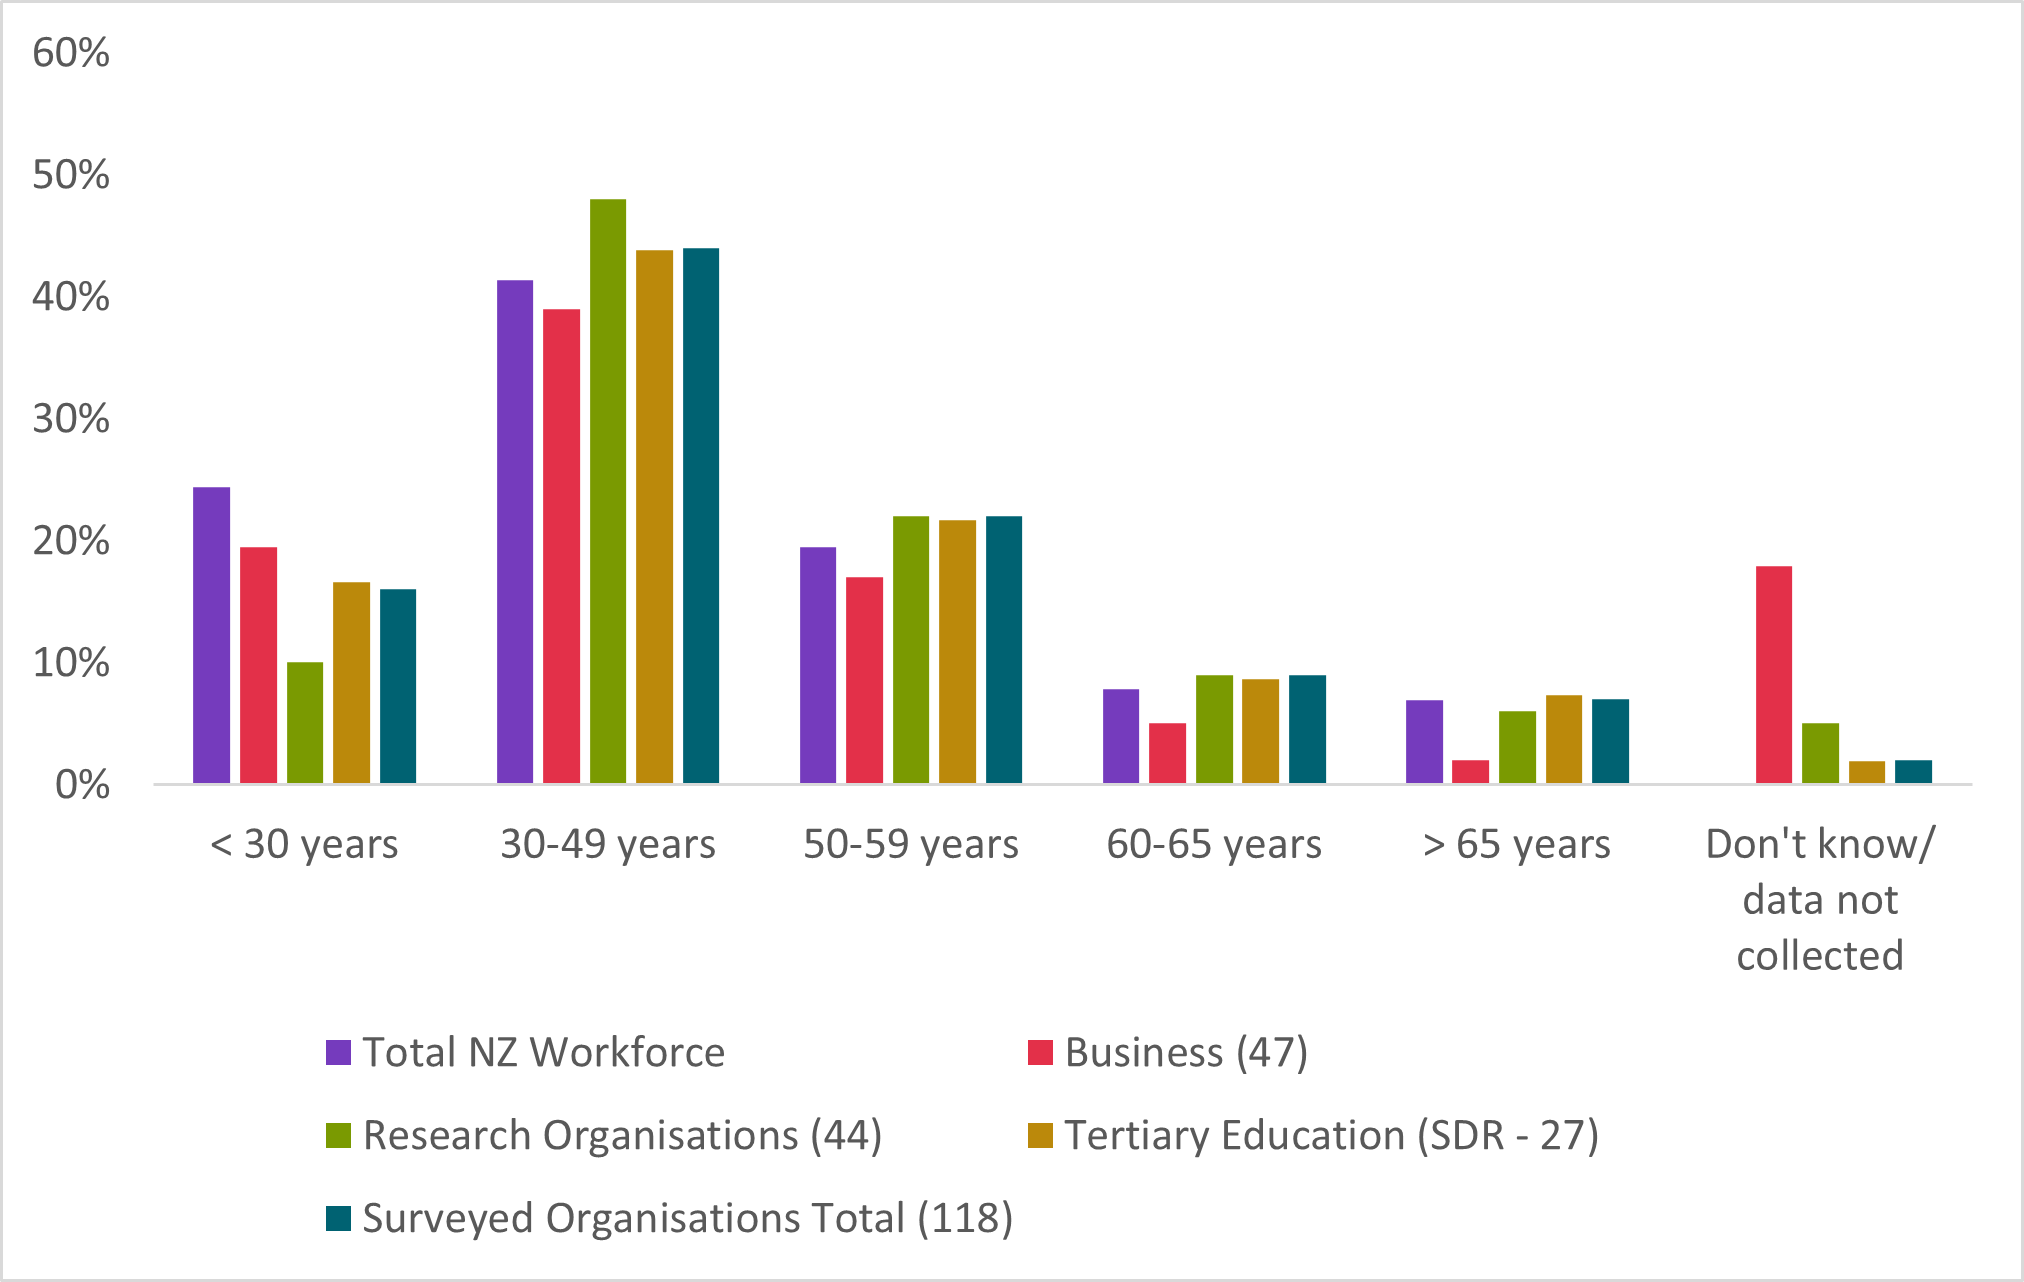 This figure is a clustered column chart showing the age distribution of Research, Science and Innovation employees by organisation type. The chart has 6 clusters representing each age group (< 30 years, 30-49 years, 50-59 years, 60-65 years, > 65 years, Don't know/data not collected). Each cluster has 5 columns representing each organisation type (Total NZ Workforce, Business, Research Organisations, Tertiary Education, Surveyed Organisations Total). The X axis shows the 6 age groups, and the Y axis shows the percentage in each age group. There is a key at the bottom of the chart showing the 5 organisation types.